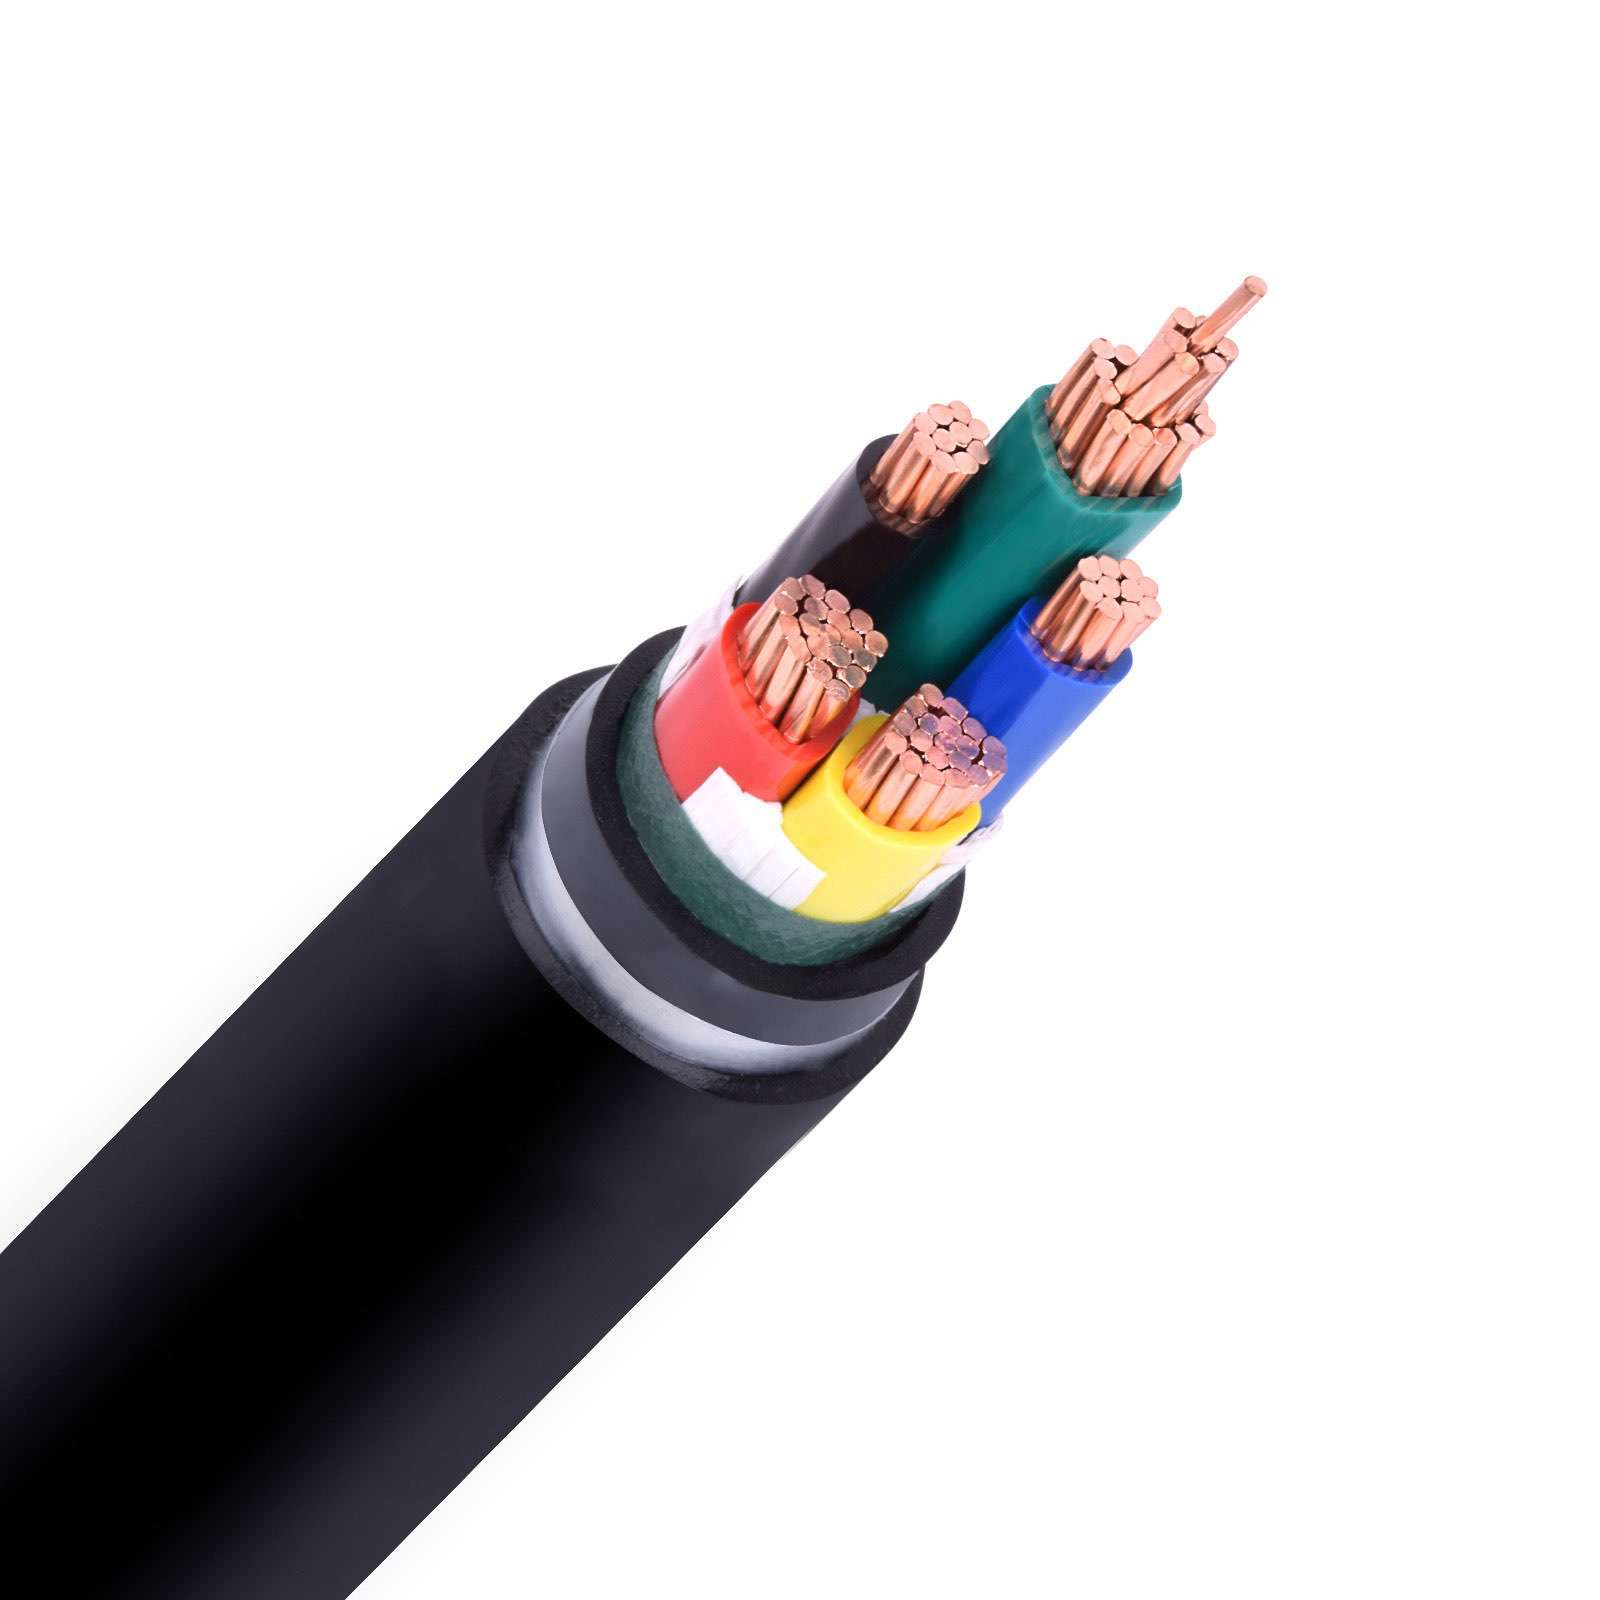 0.6/1KV PVC Insulated and Sheathed Power Wire PVC Cable